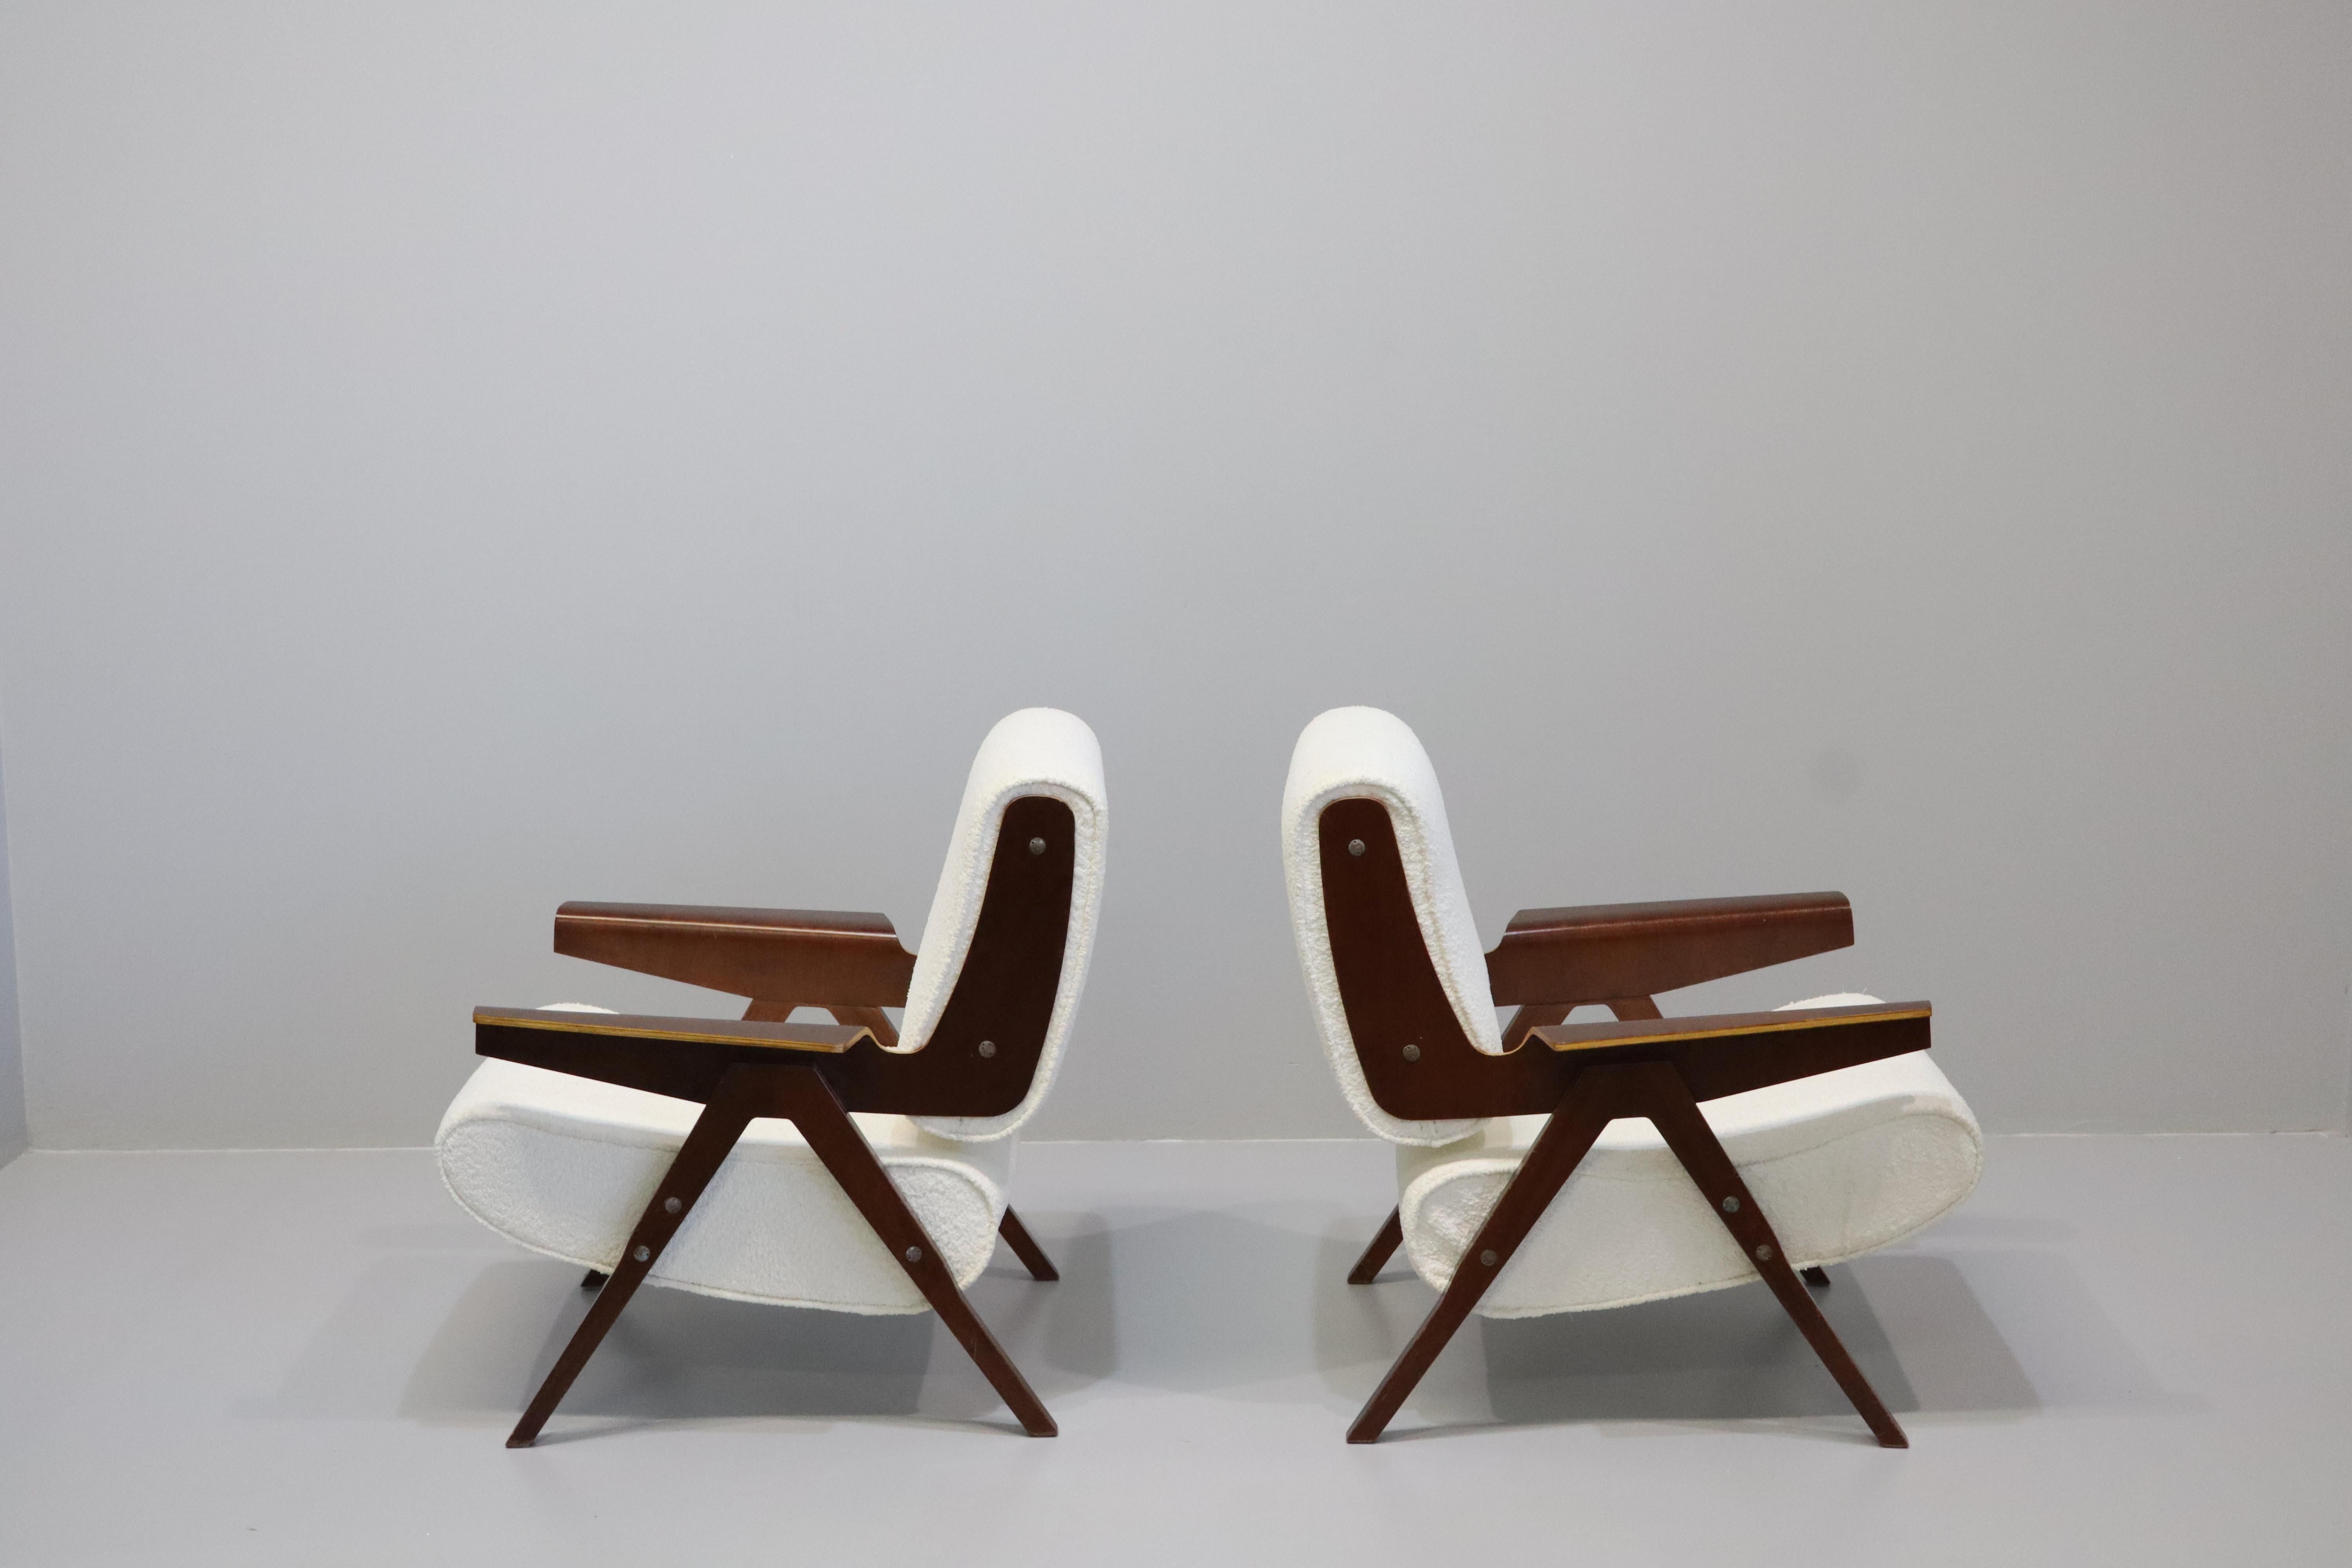 Incredible pair of model 831 chairs by Gianfranco Frattini for Cassina, 1950s. 
These model chairs are exceptionally rare. 
The fantastic design by renowned Italian designer Gianfranco Frattini shows its iconic features in the angular mahogany